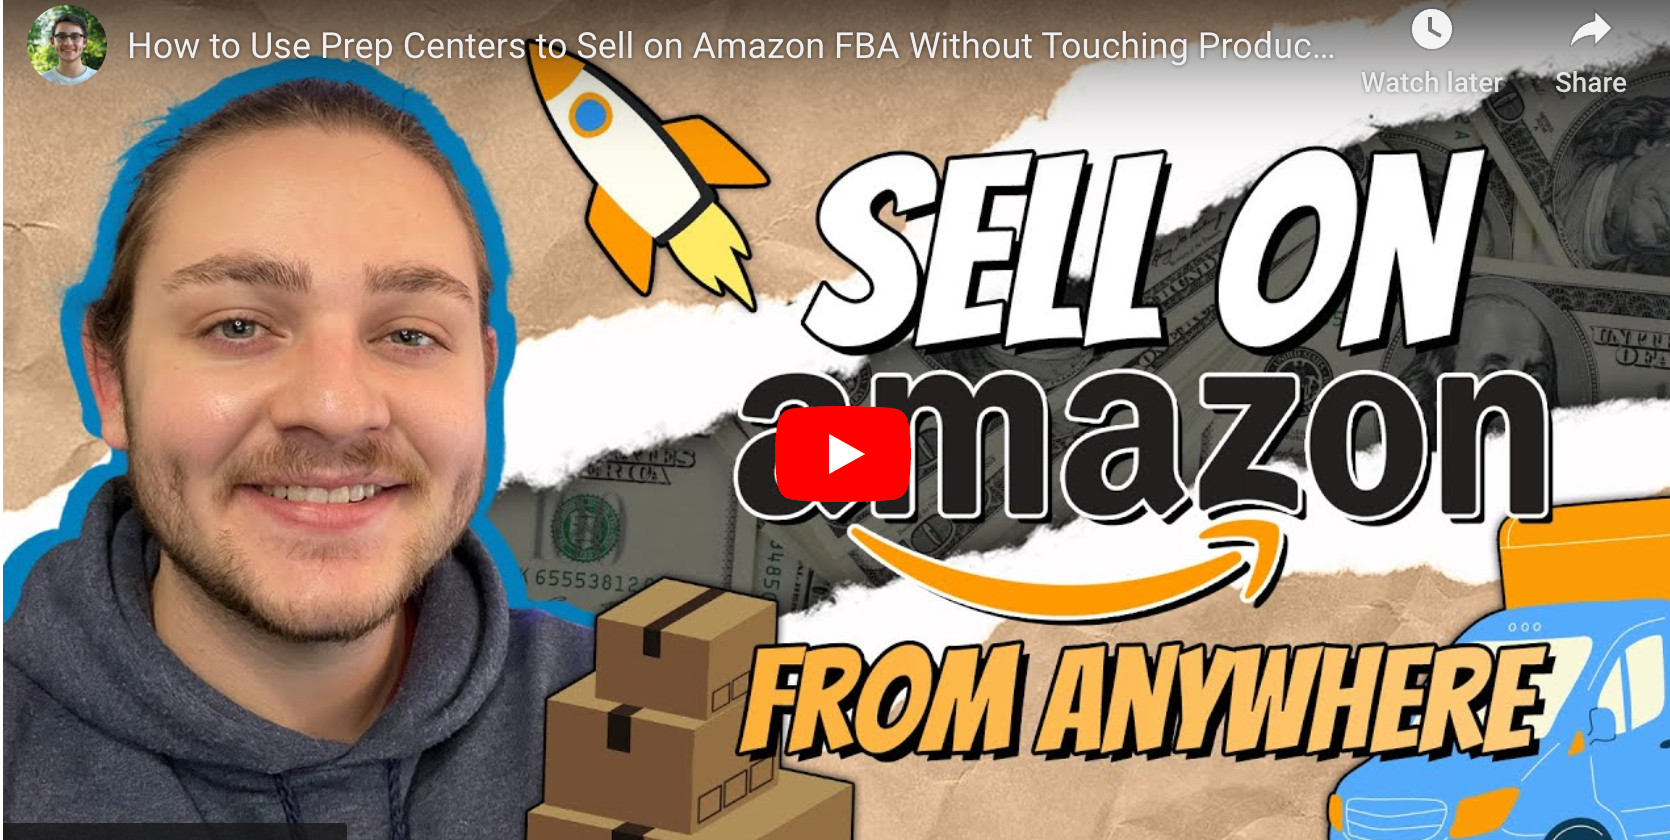 Inside Amazon's Prep Center: A Look at the Hub of Product Preparation